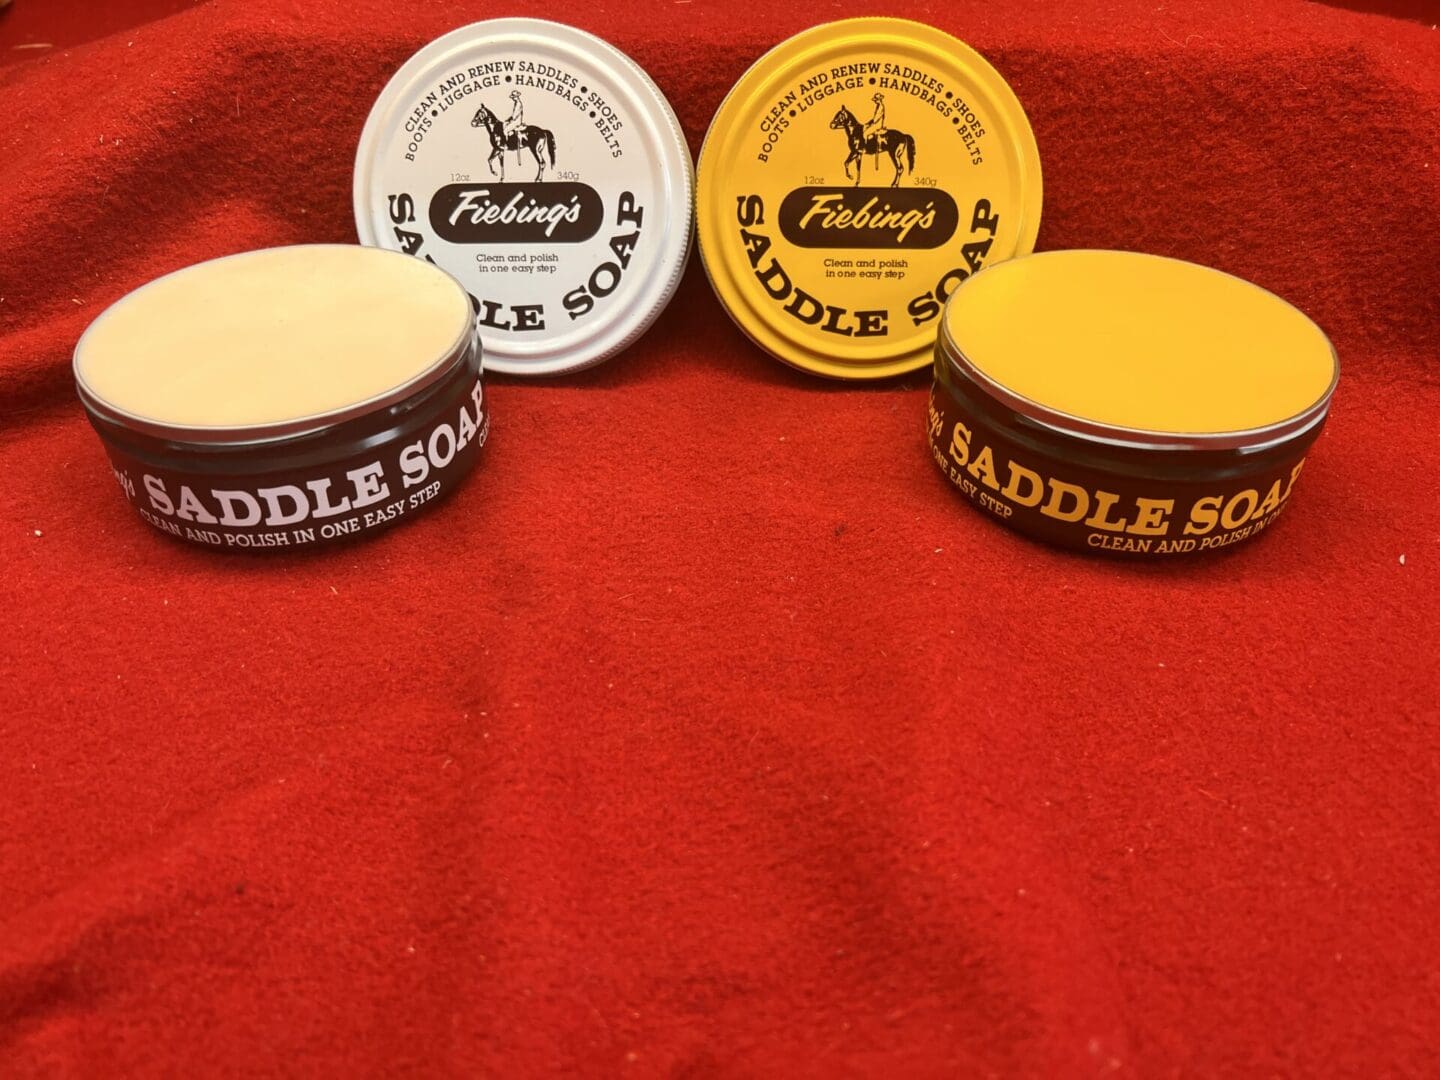 Containers of Fiebing’s saddle soap